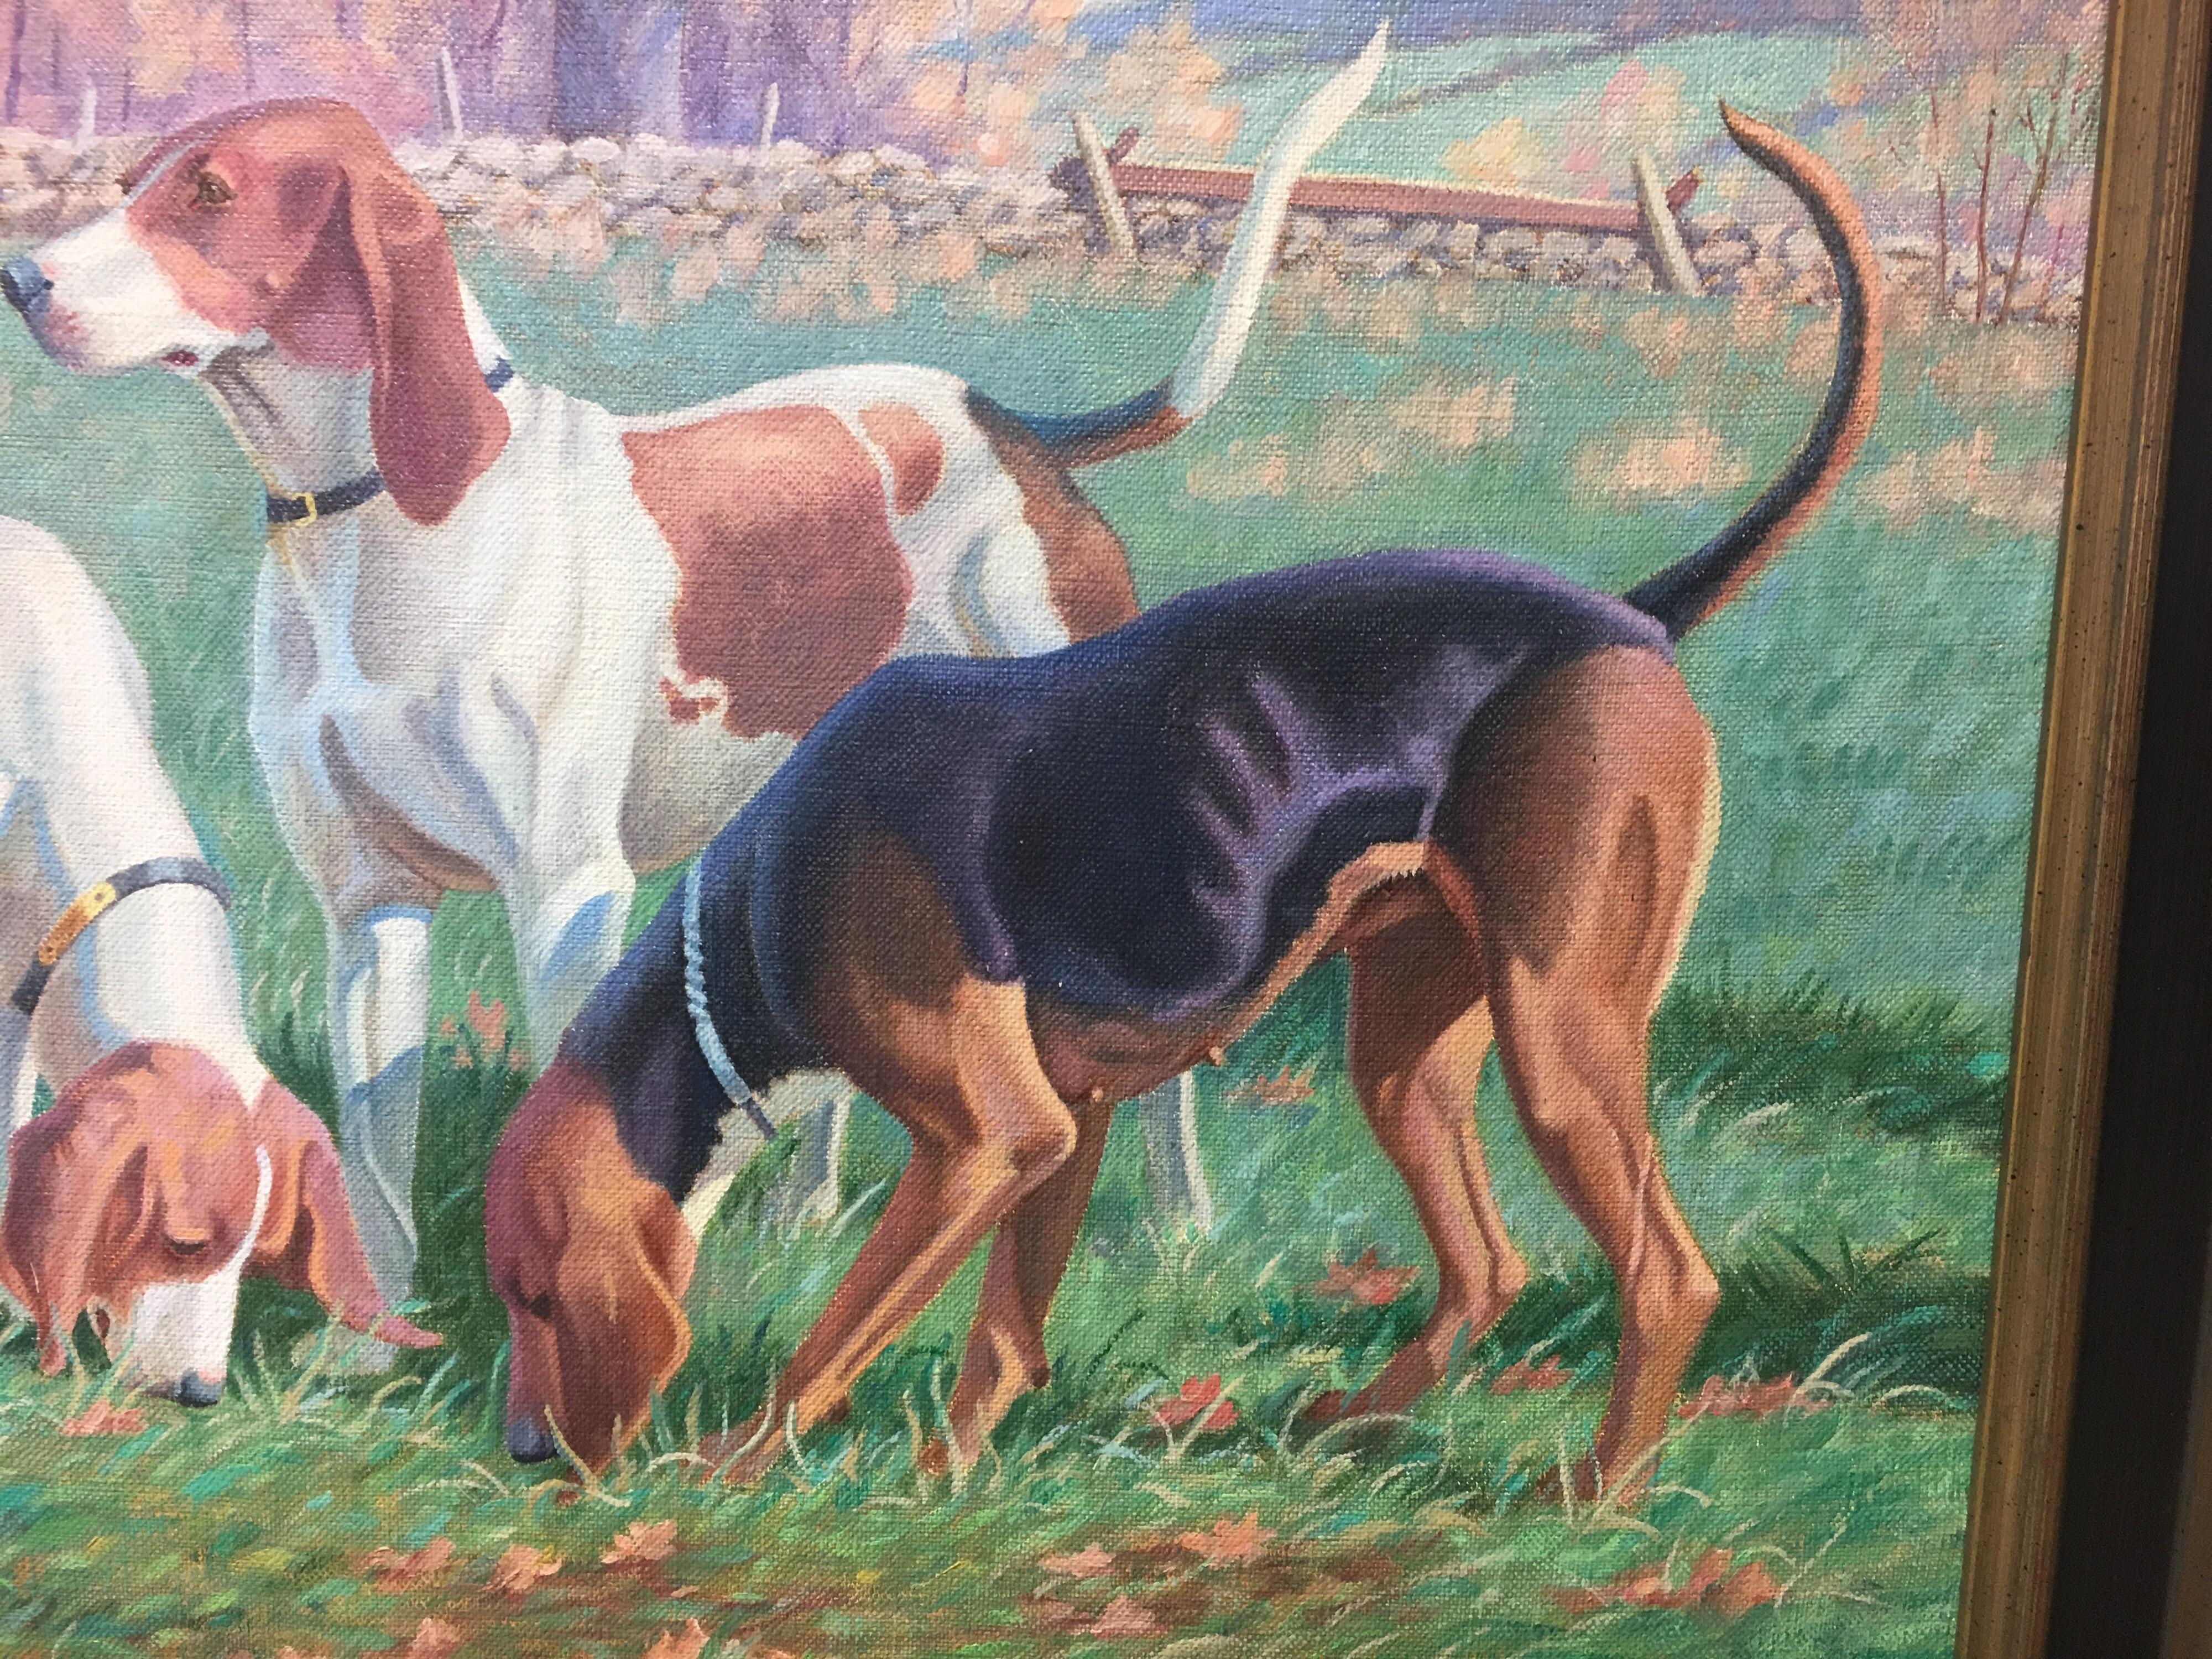 Original Signed Edward Tomasiewicz Oil Painting Gathering of Dogs 2